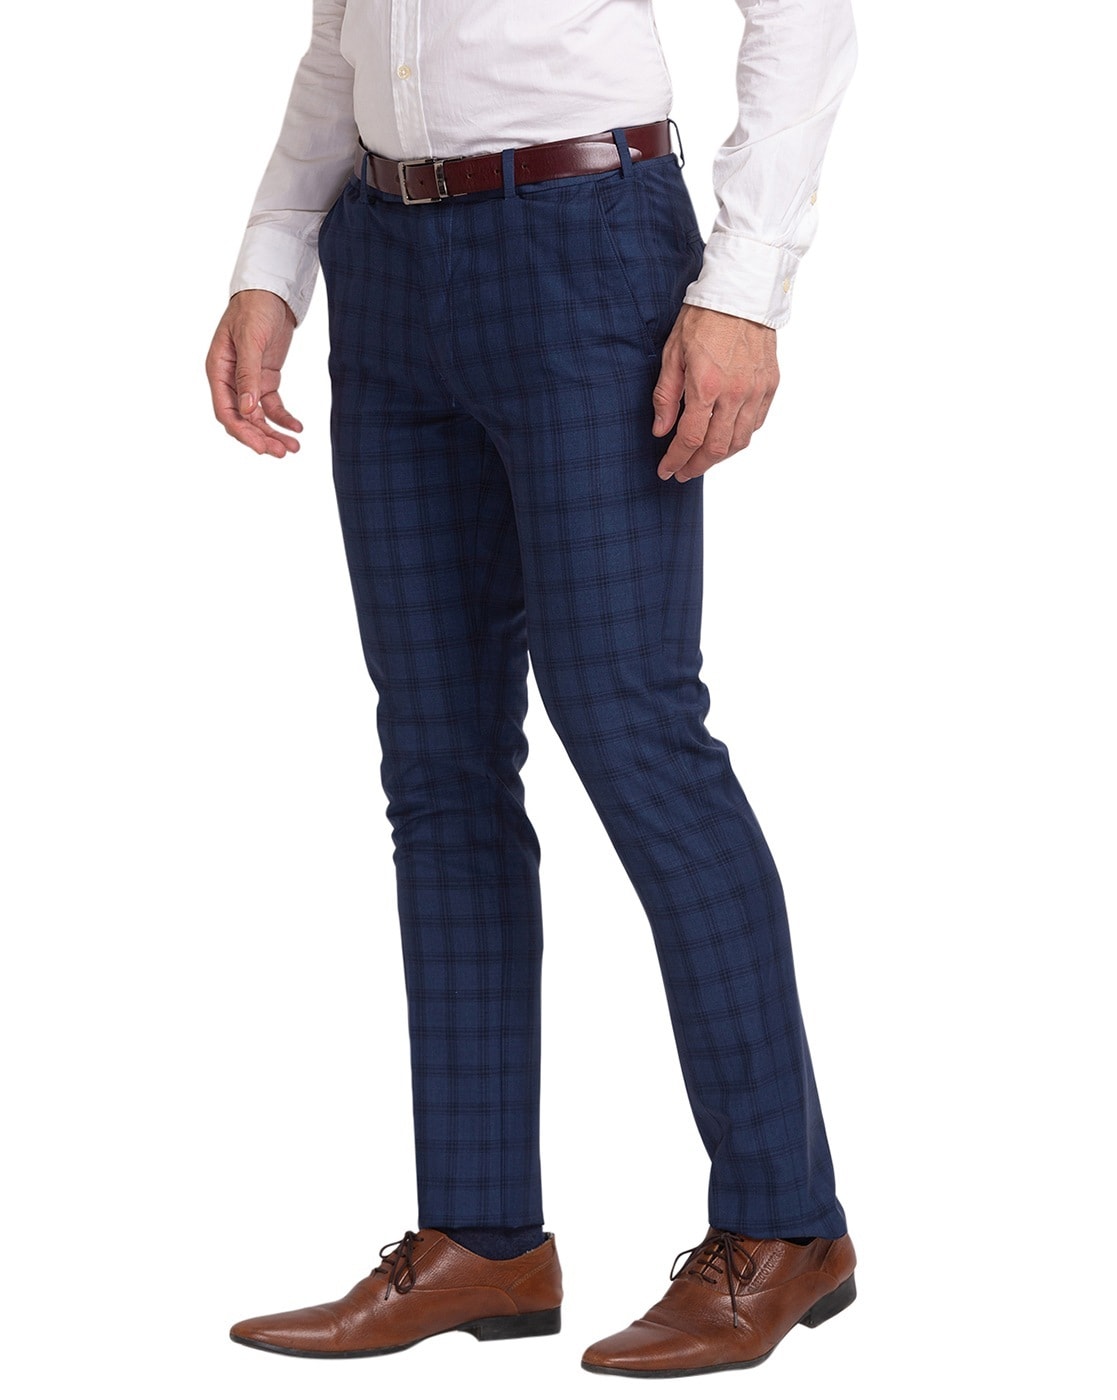 Reece Suit Tailored Trouser Blue Check